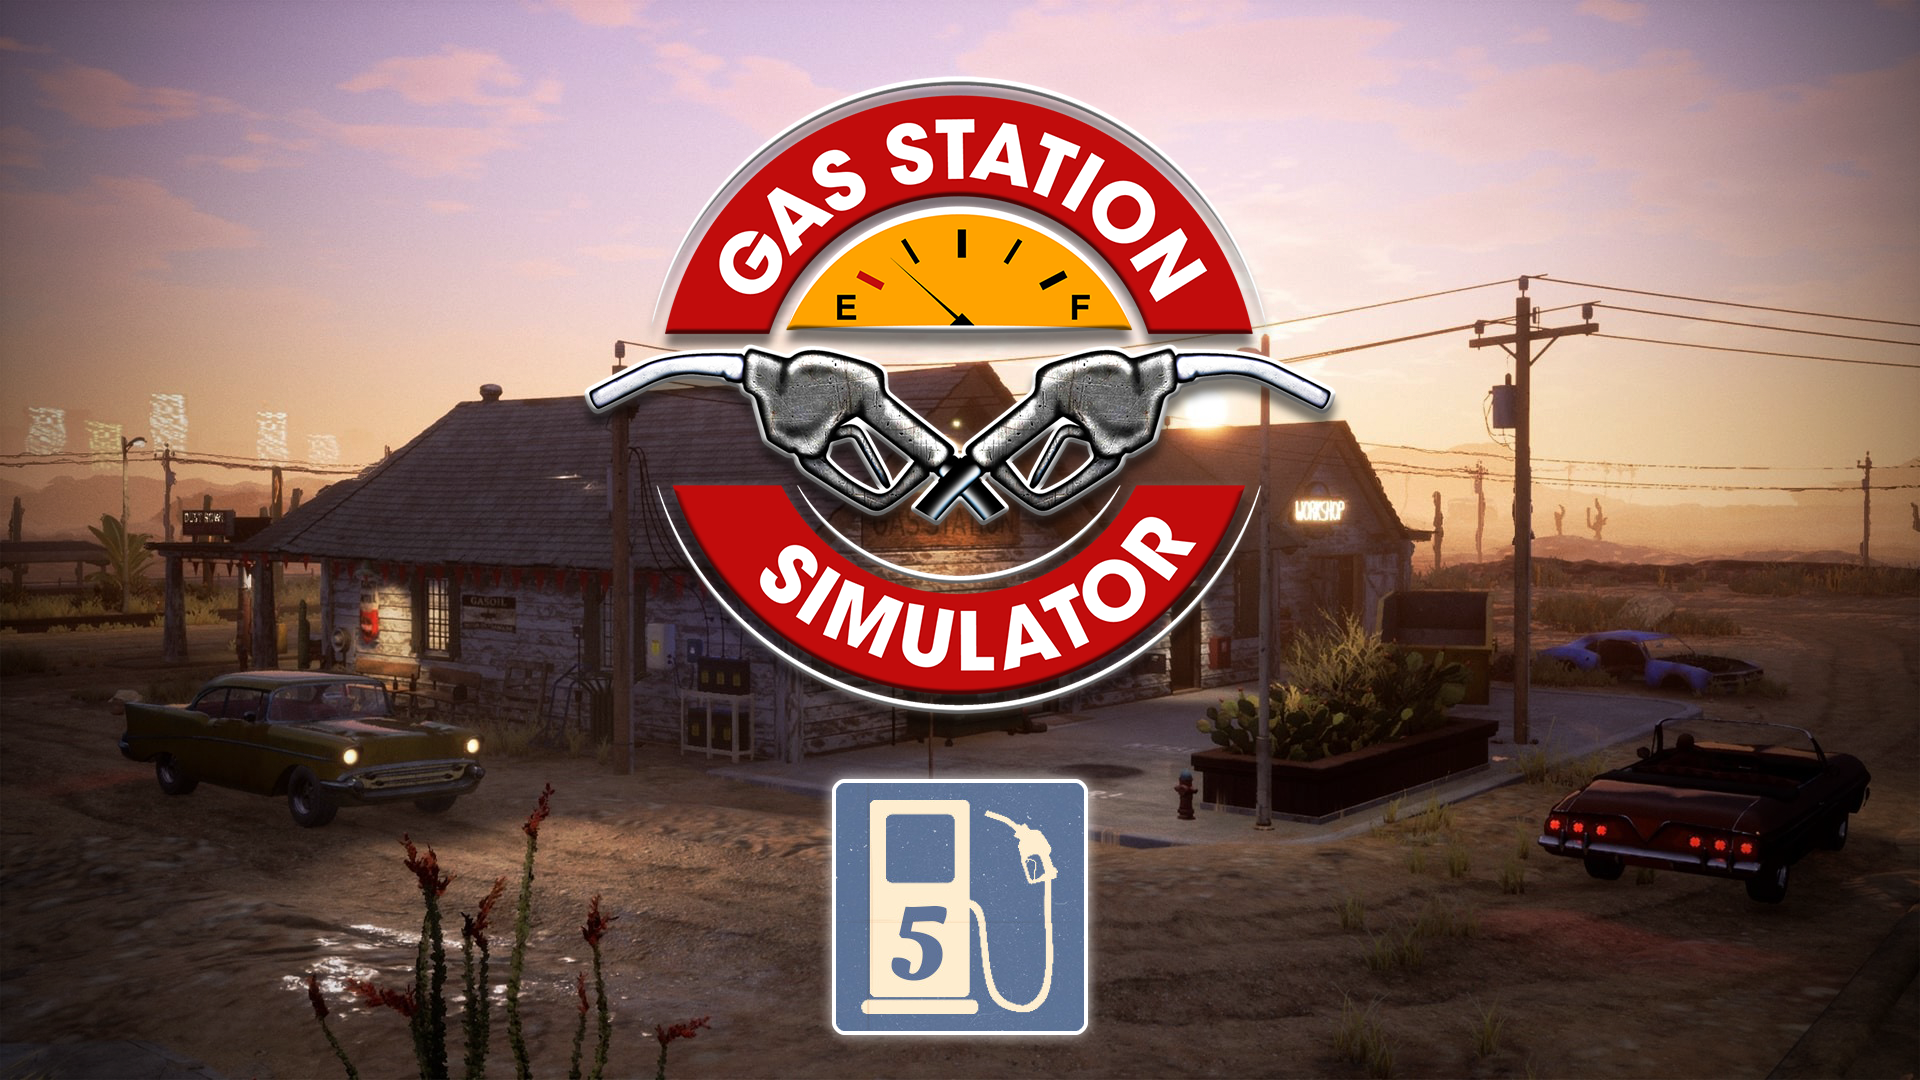 Icon for Station Lvl. 5